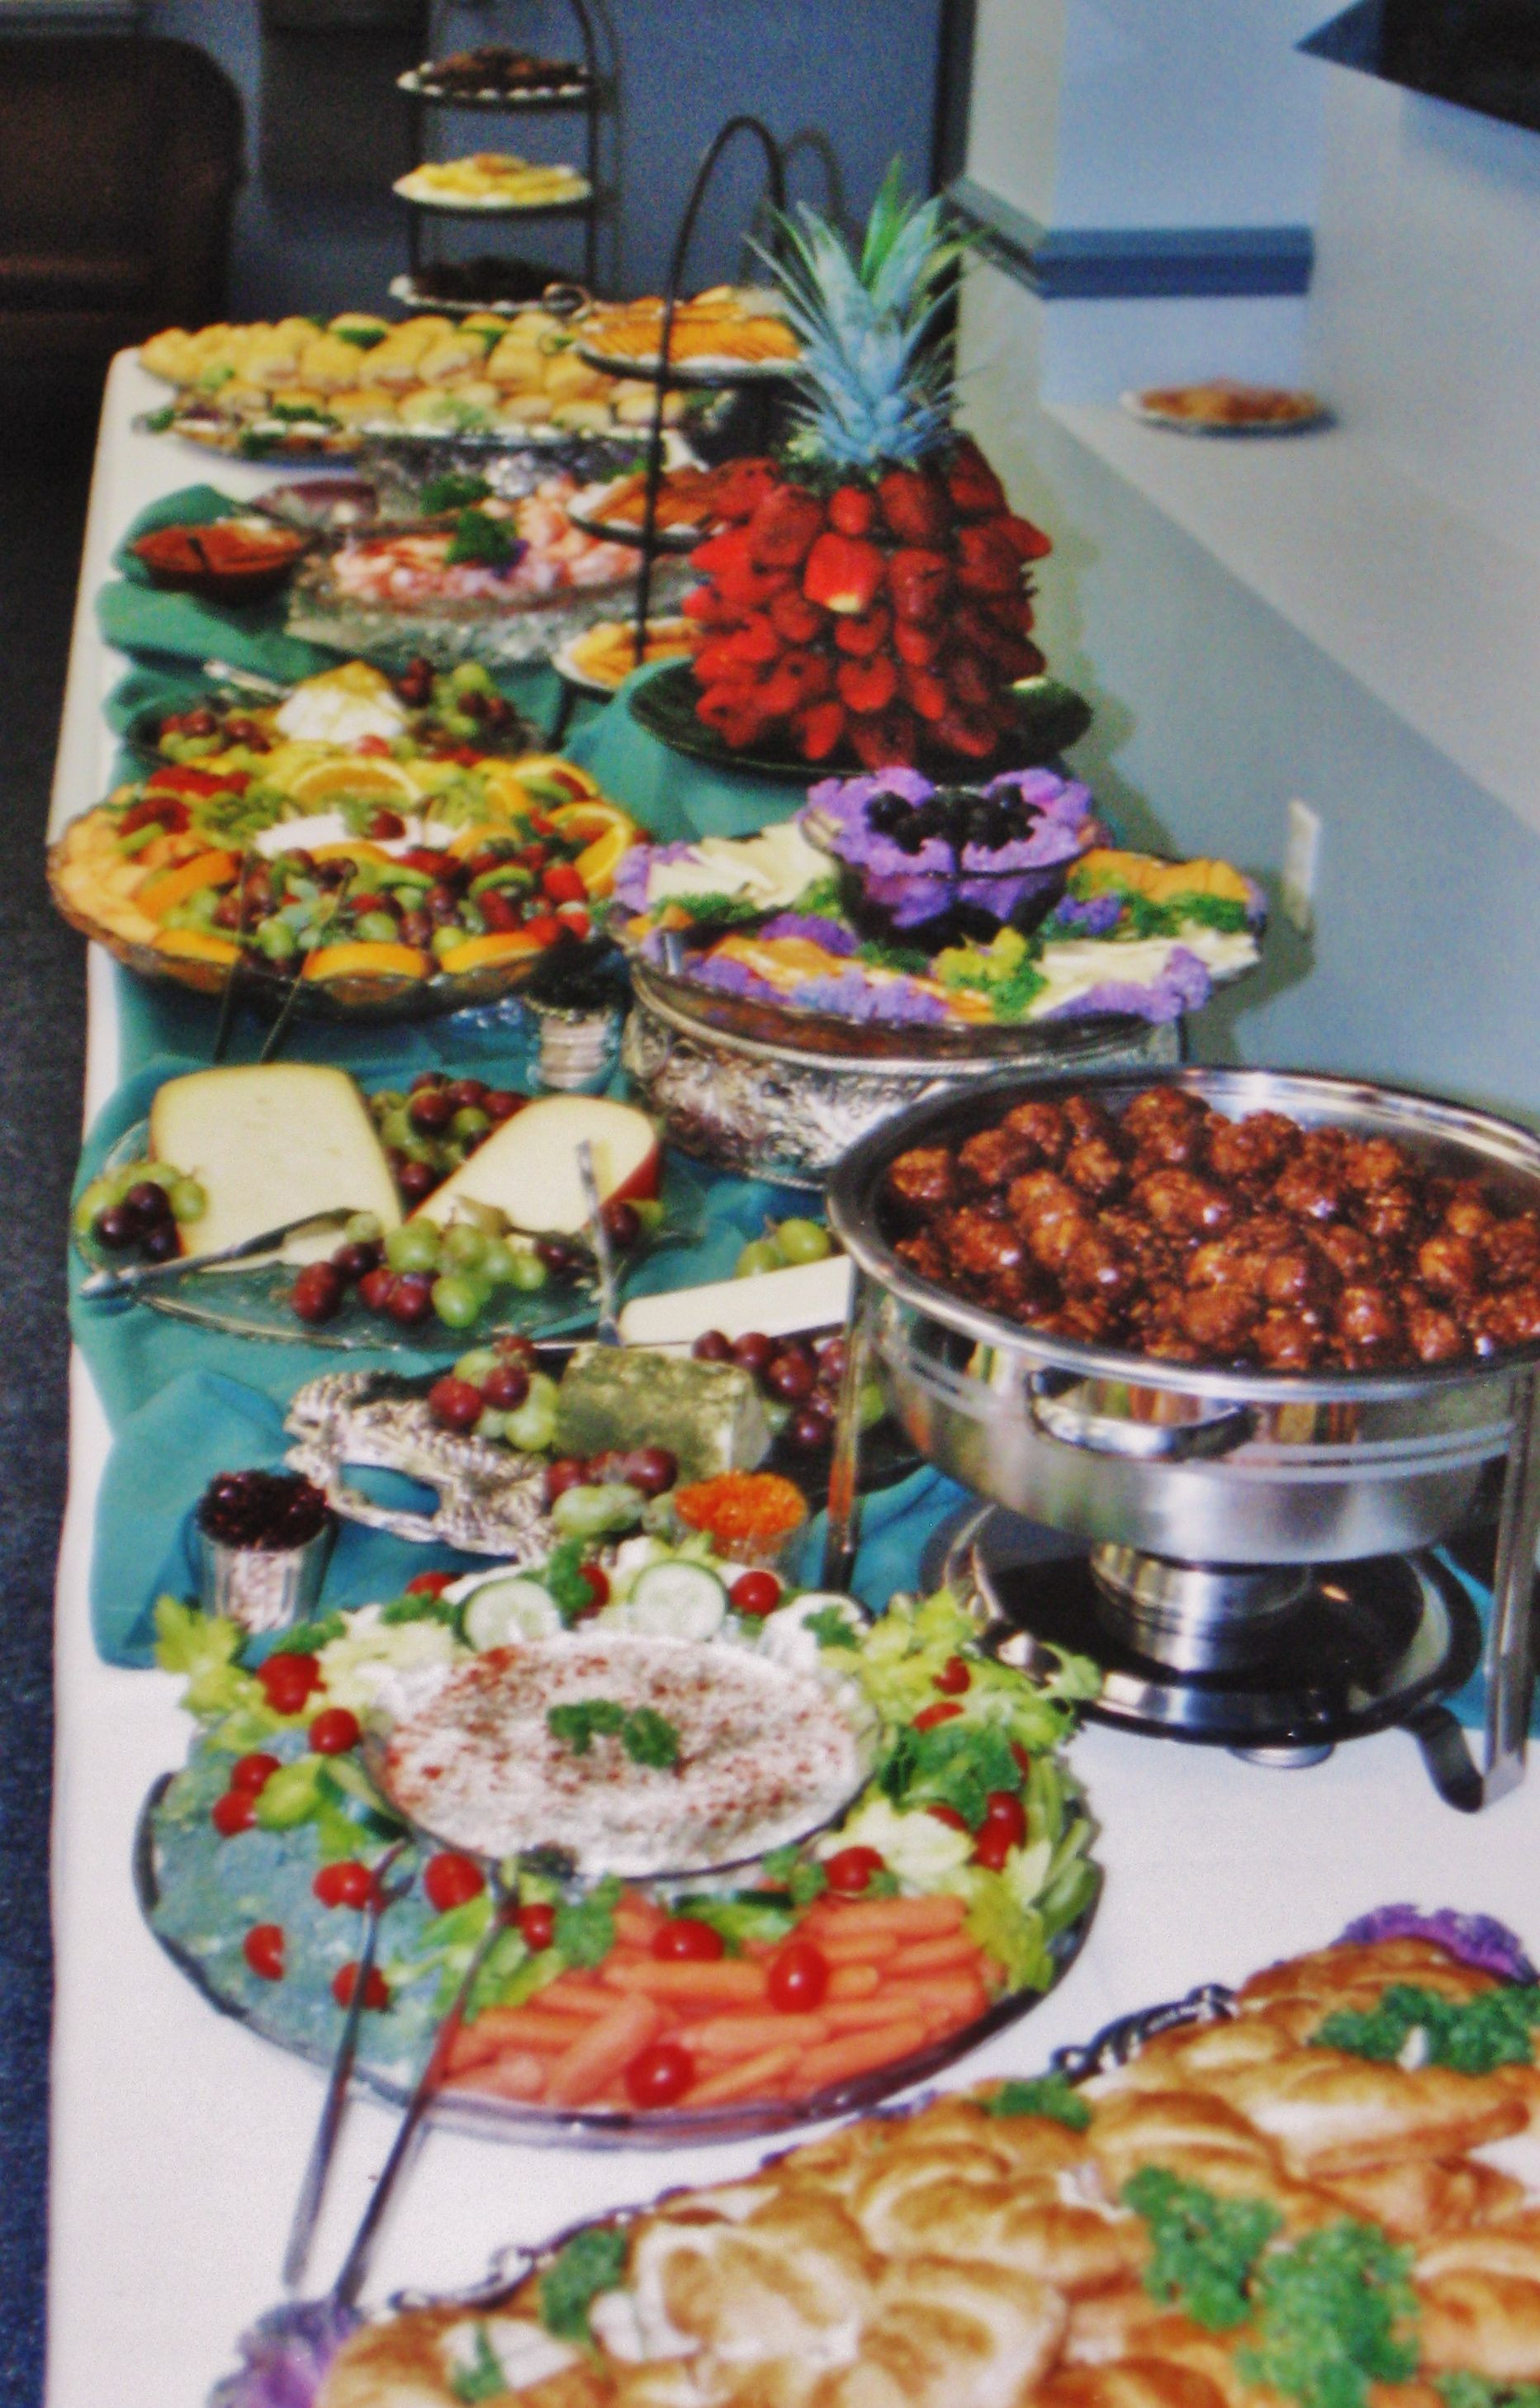 Office Christmas Party Menu Ideas
 Buffet for a Drs fice open house with smokey bbq